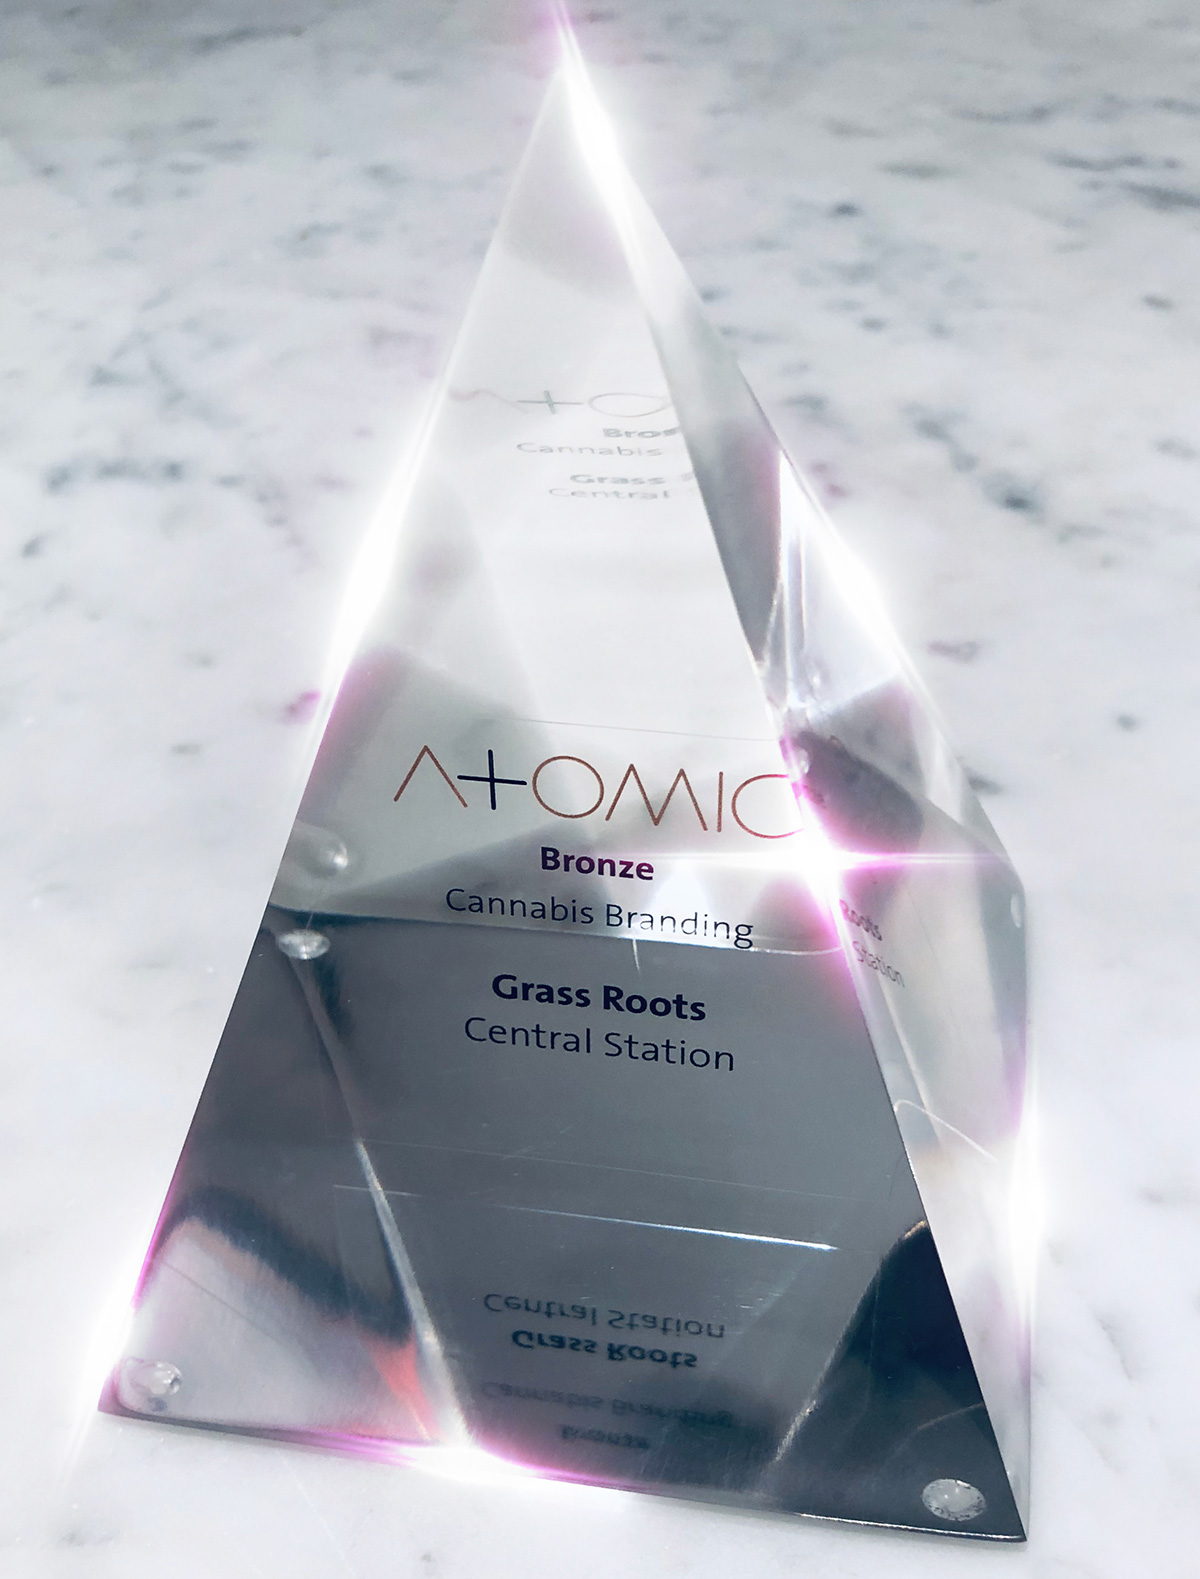 Atomic Award - Recognition Is Central